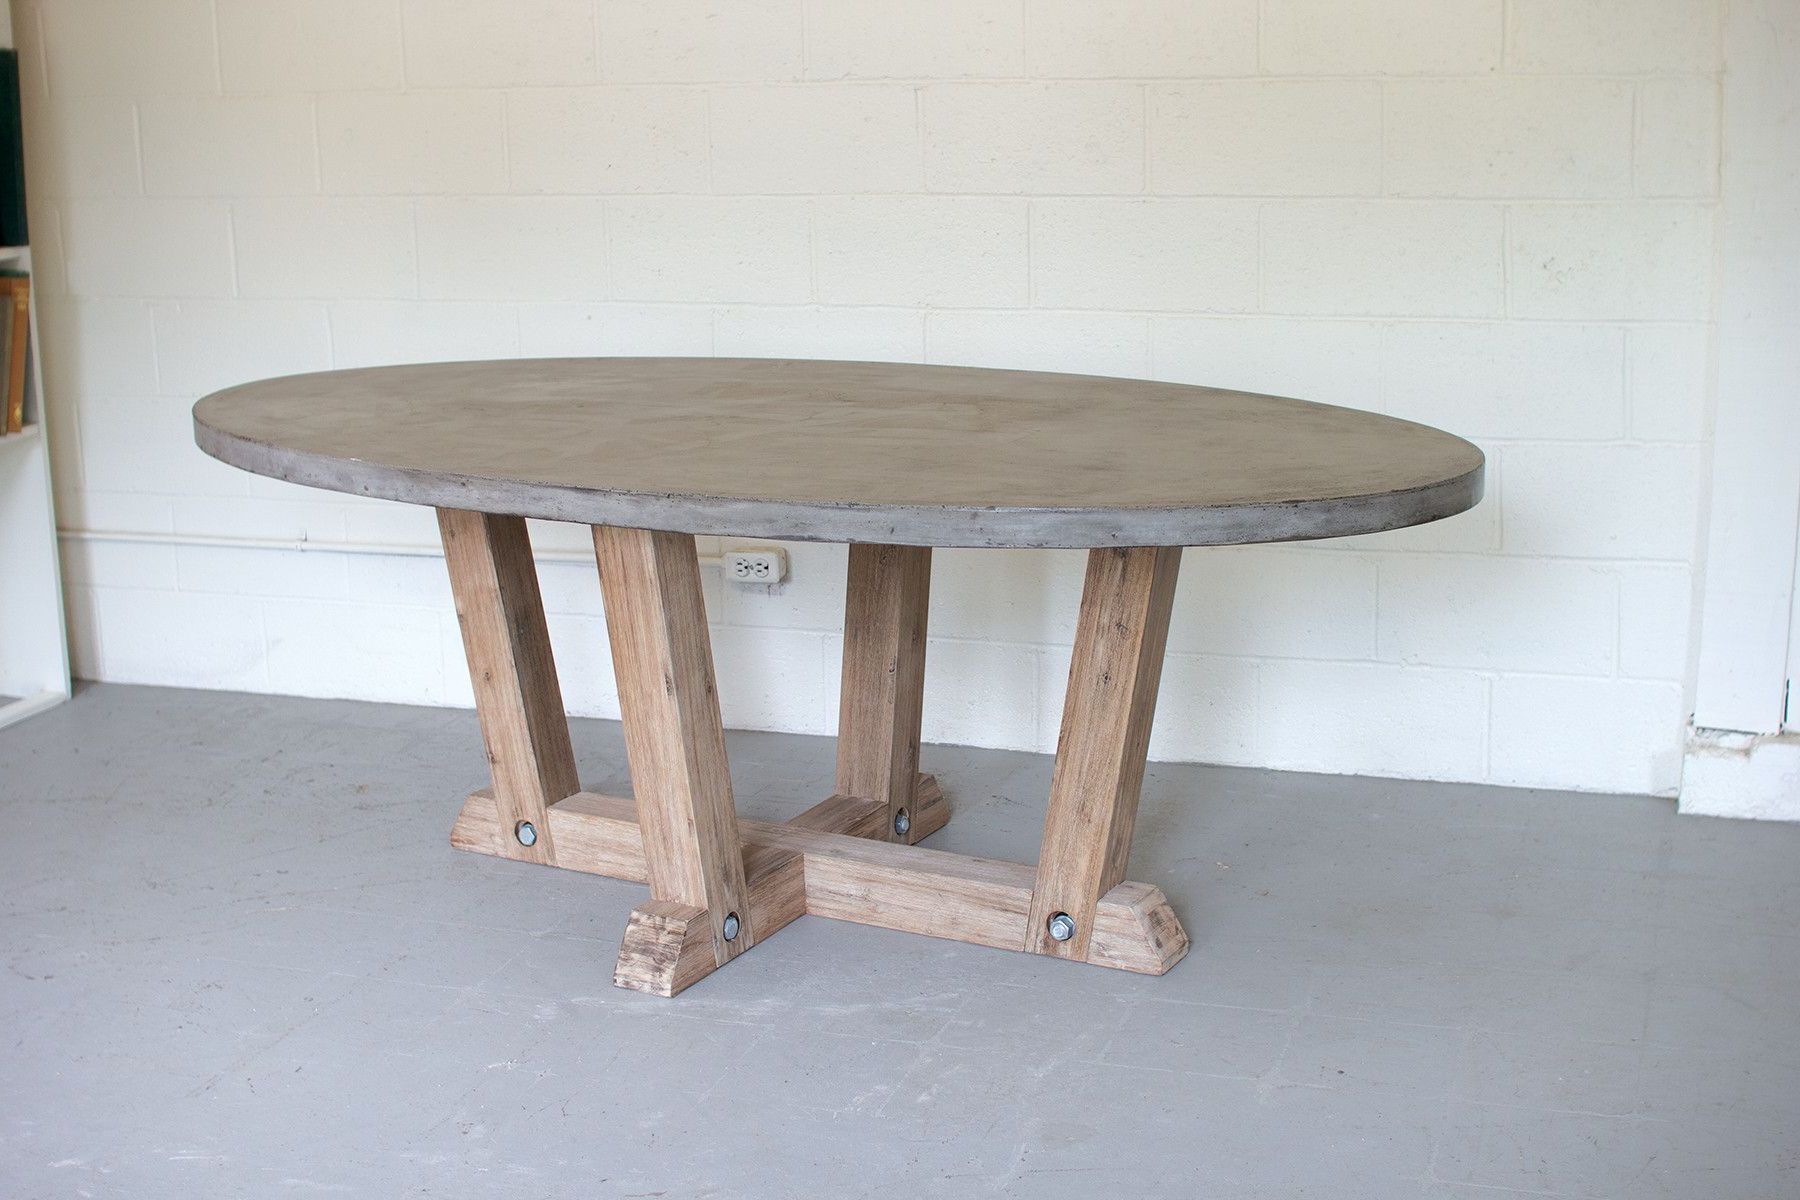 Kalalou Concrete Oval Dining Table With Wooden Base In 2019 Intended For Trendy James Adjustables Height Extending Dining Tables (View 25 of 25)